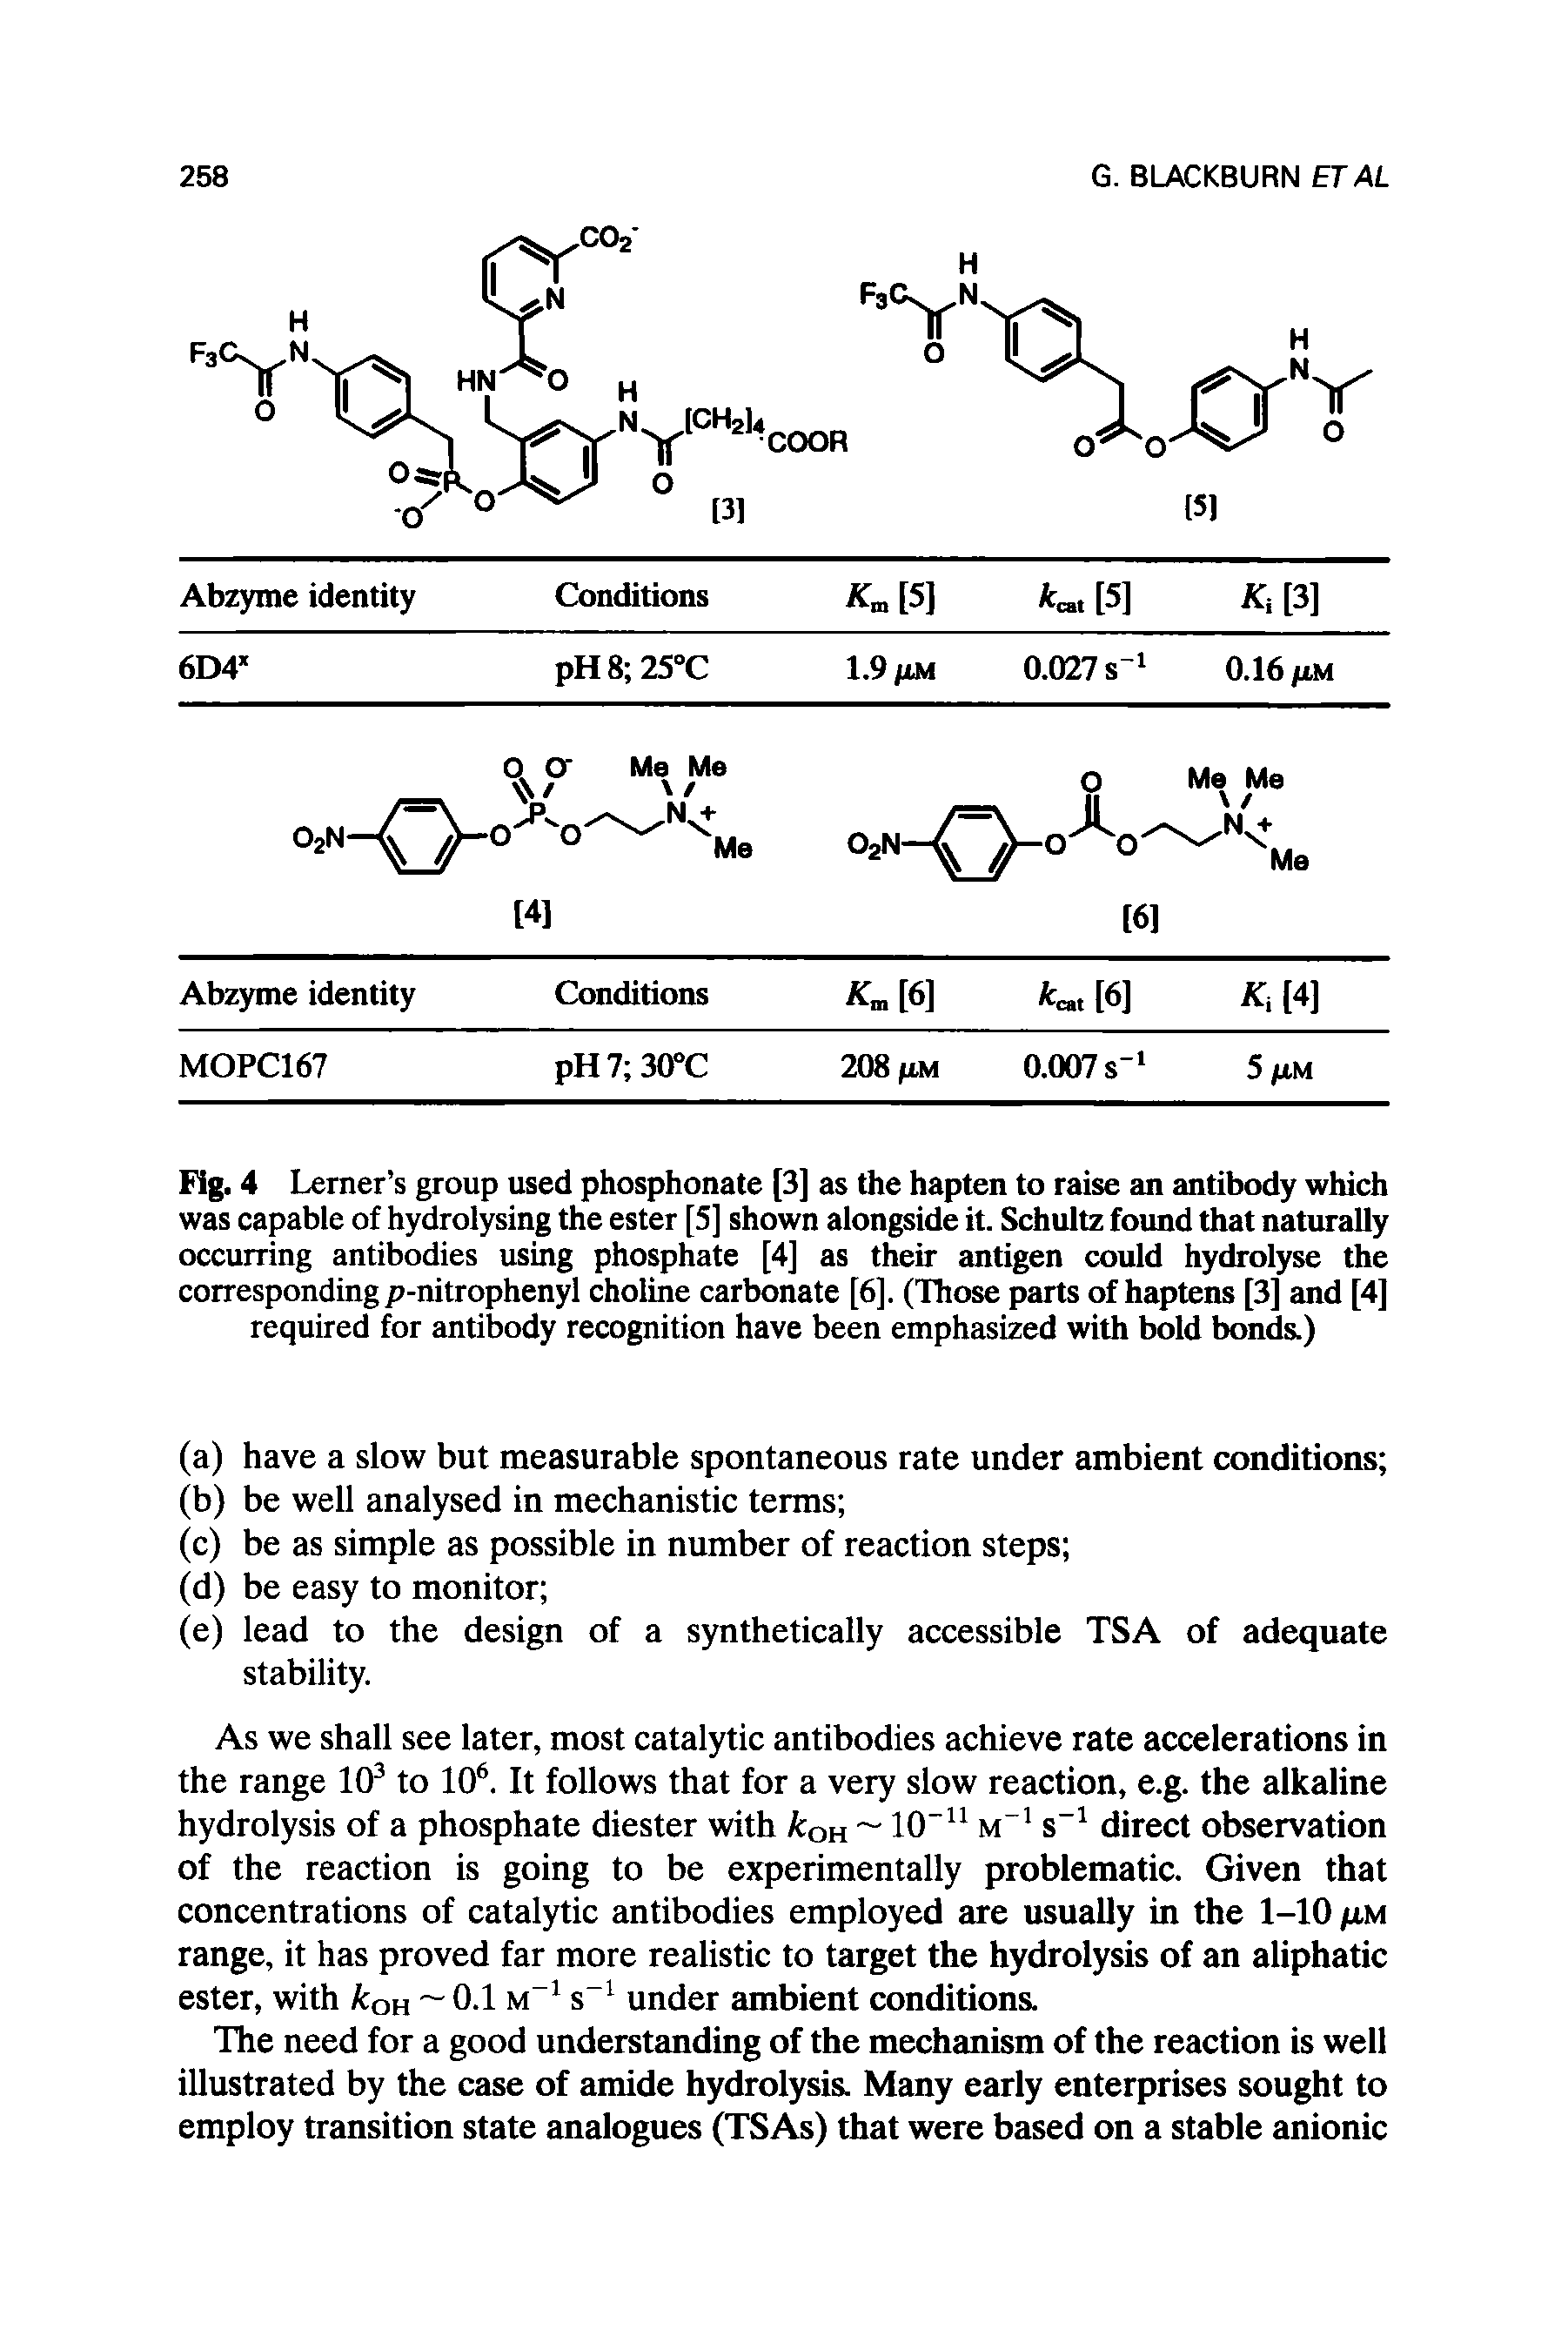 Fig. 4 Lerner s group used phosphonate [3] as the hapten to raise an antibody which was capable of hydrolysing the ester [5] shown alongside it. Schultz found that naturally occurring antibodies using phosphate [4] as their antigen could hydrolyse the corresponding p-nitrophenyl choline carbonate [6]. (Those parts of haptens [3] and [4] required for antibody recognition have been emphasized with bold bonds.)...